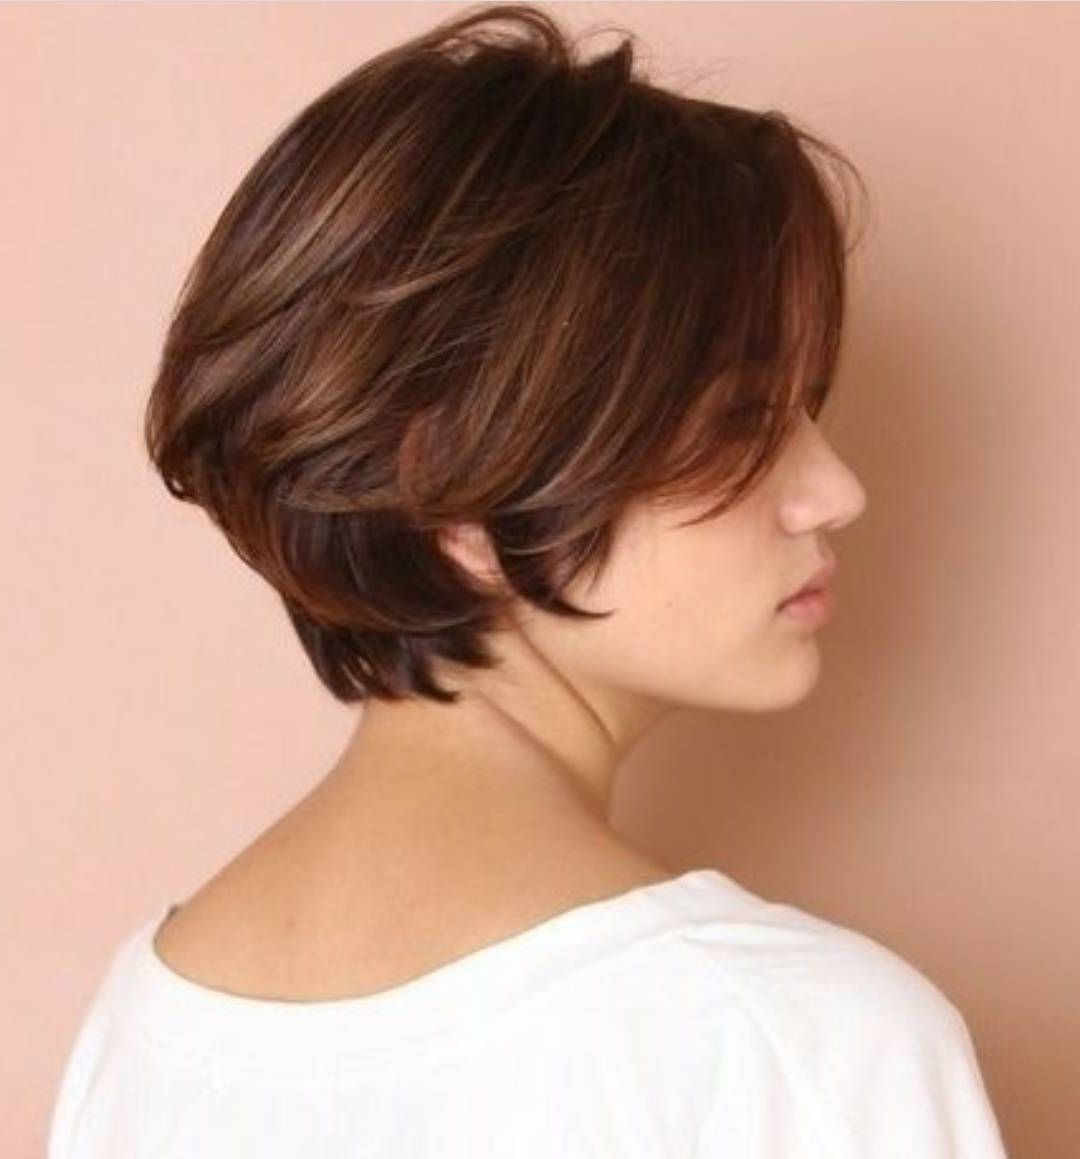 10 Chic Short Bob Haircuts That Balance Your Face Shape! – Short Inside Center Part Short Hairstyles (View 14 of 25)